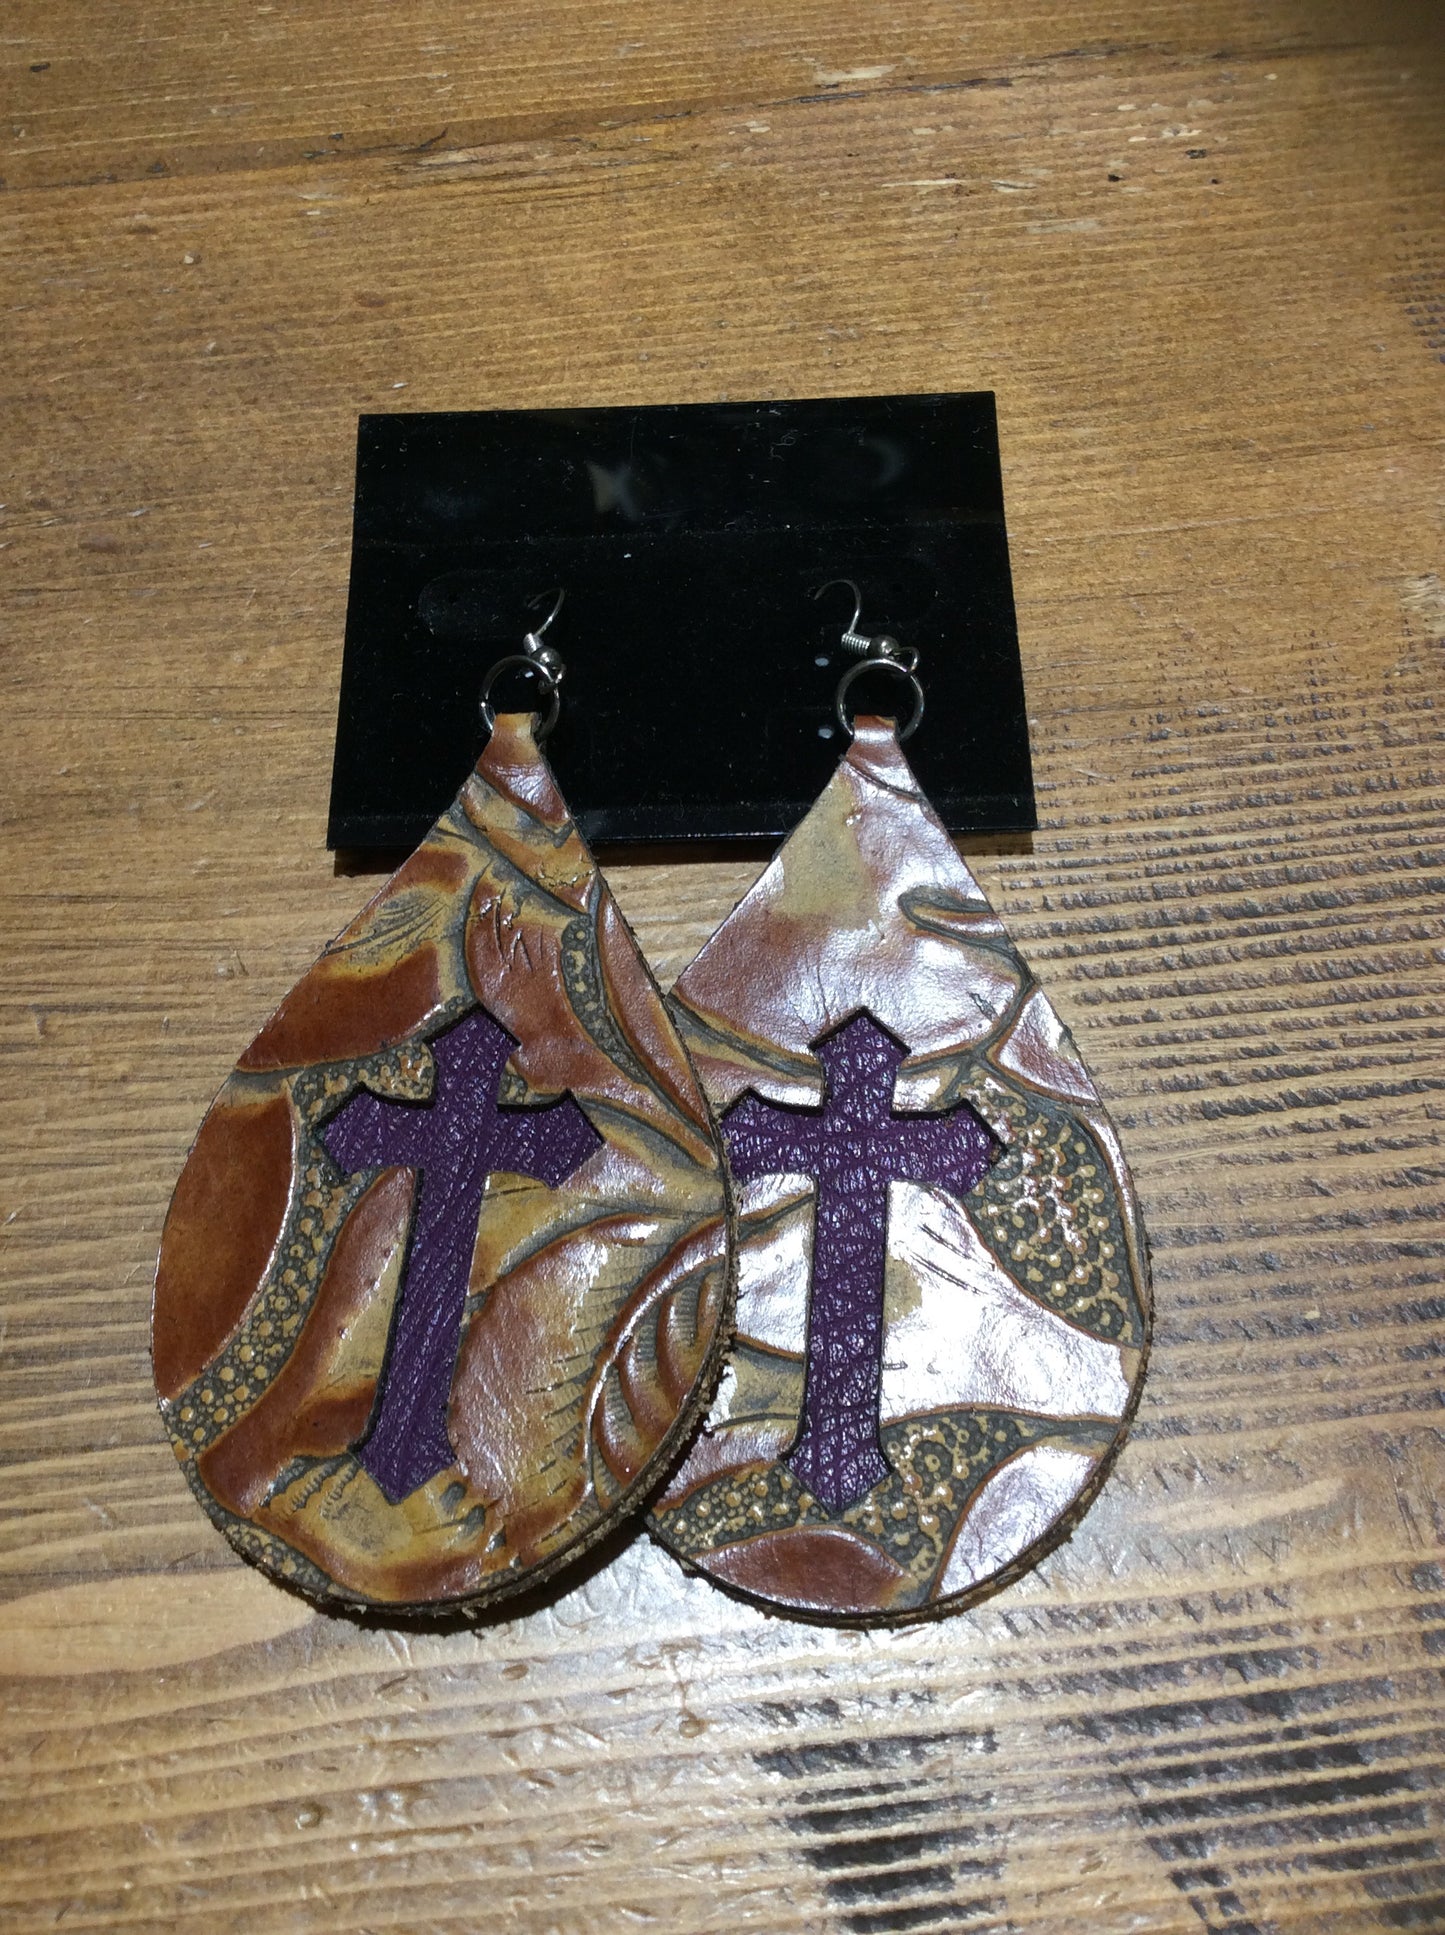 3" LEATHER EARRINGS WITH INLAY